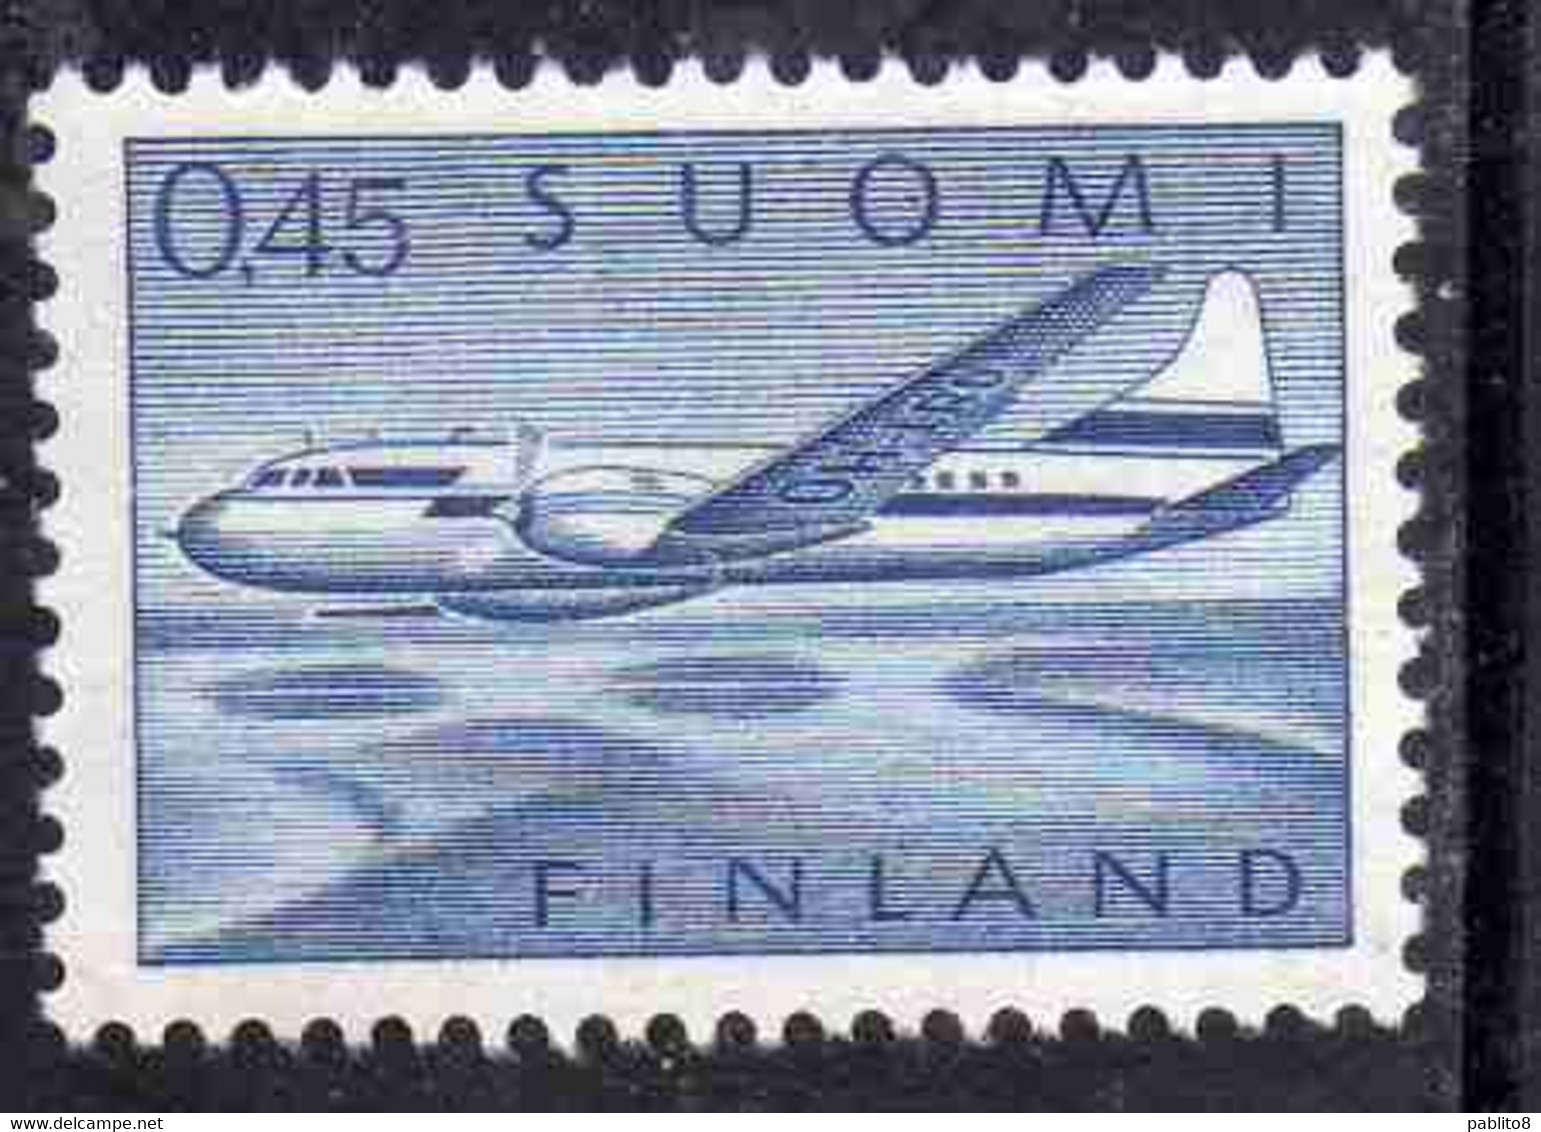 SUOMI FINLAND FINLANDIA FINLANDE 1963 AIR POST MAIL AIRMAIL CONVAIR OVER LAKES 0.45m 45p MNH - Unused Stamps